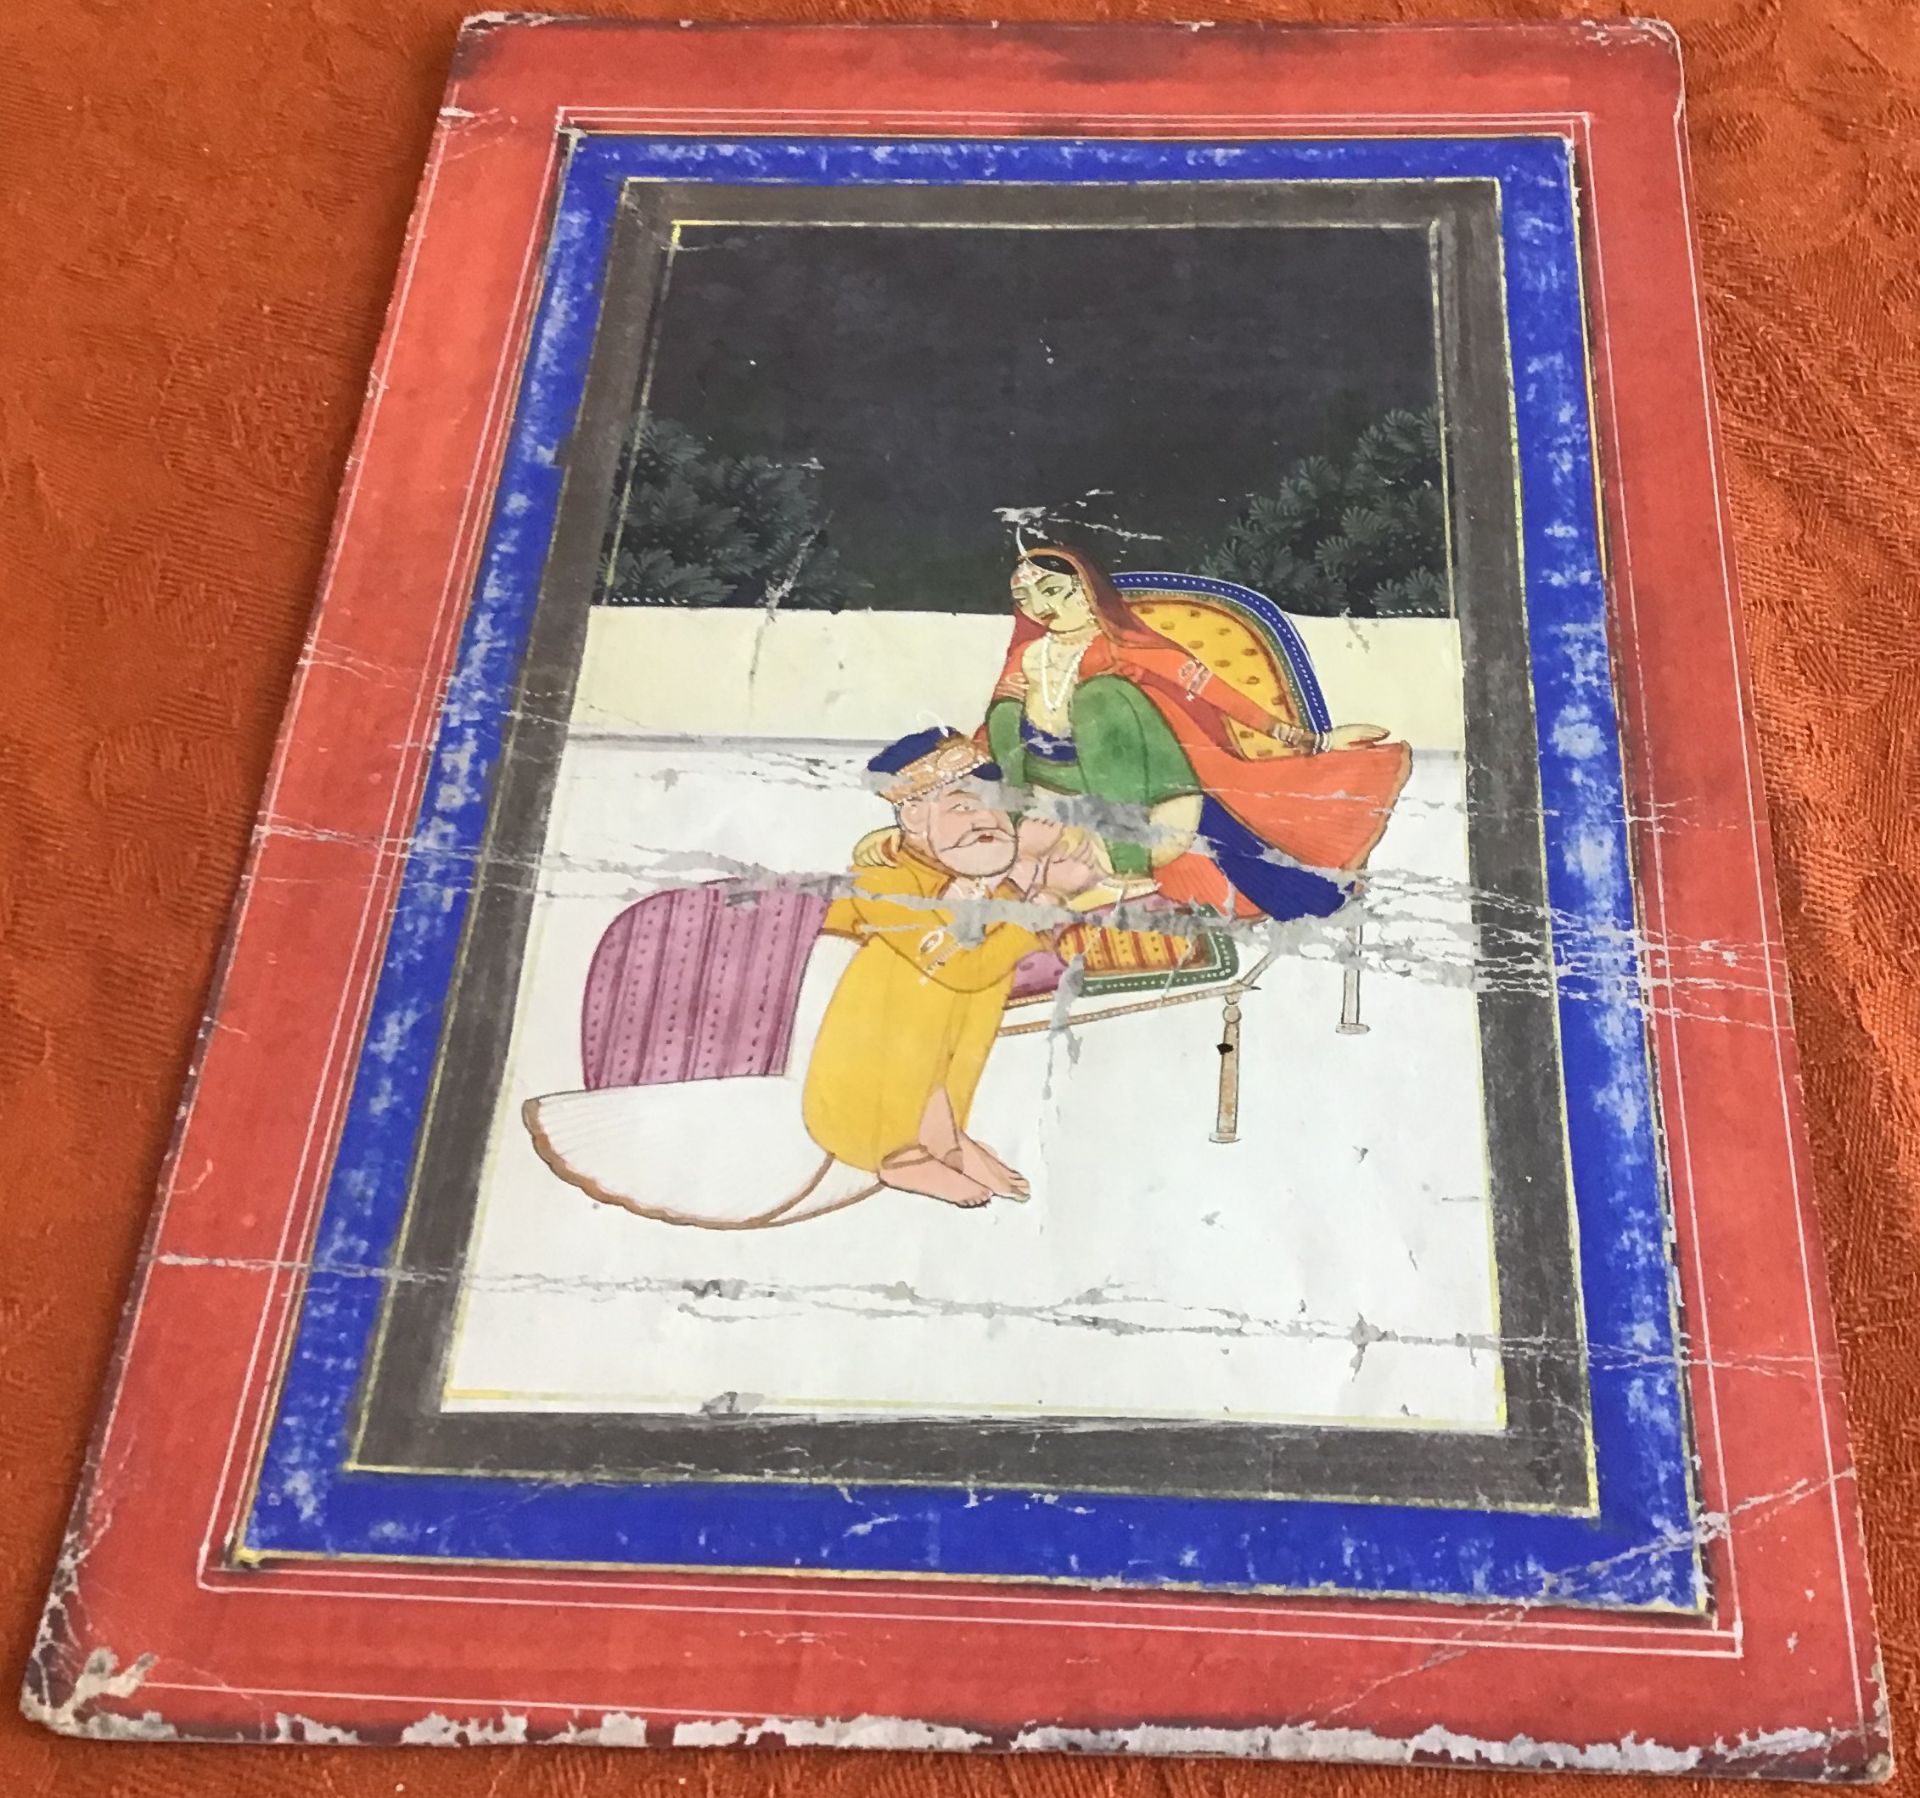 EIGHT EROTIC PAINTINGS. East India. Rajasthan, prob. Jaipur. Late 19th/beg. 20th c. Pigments and - Bild 7 aus 11